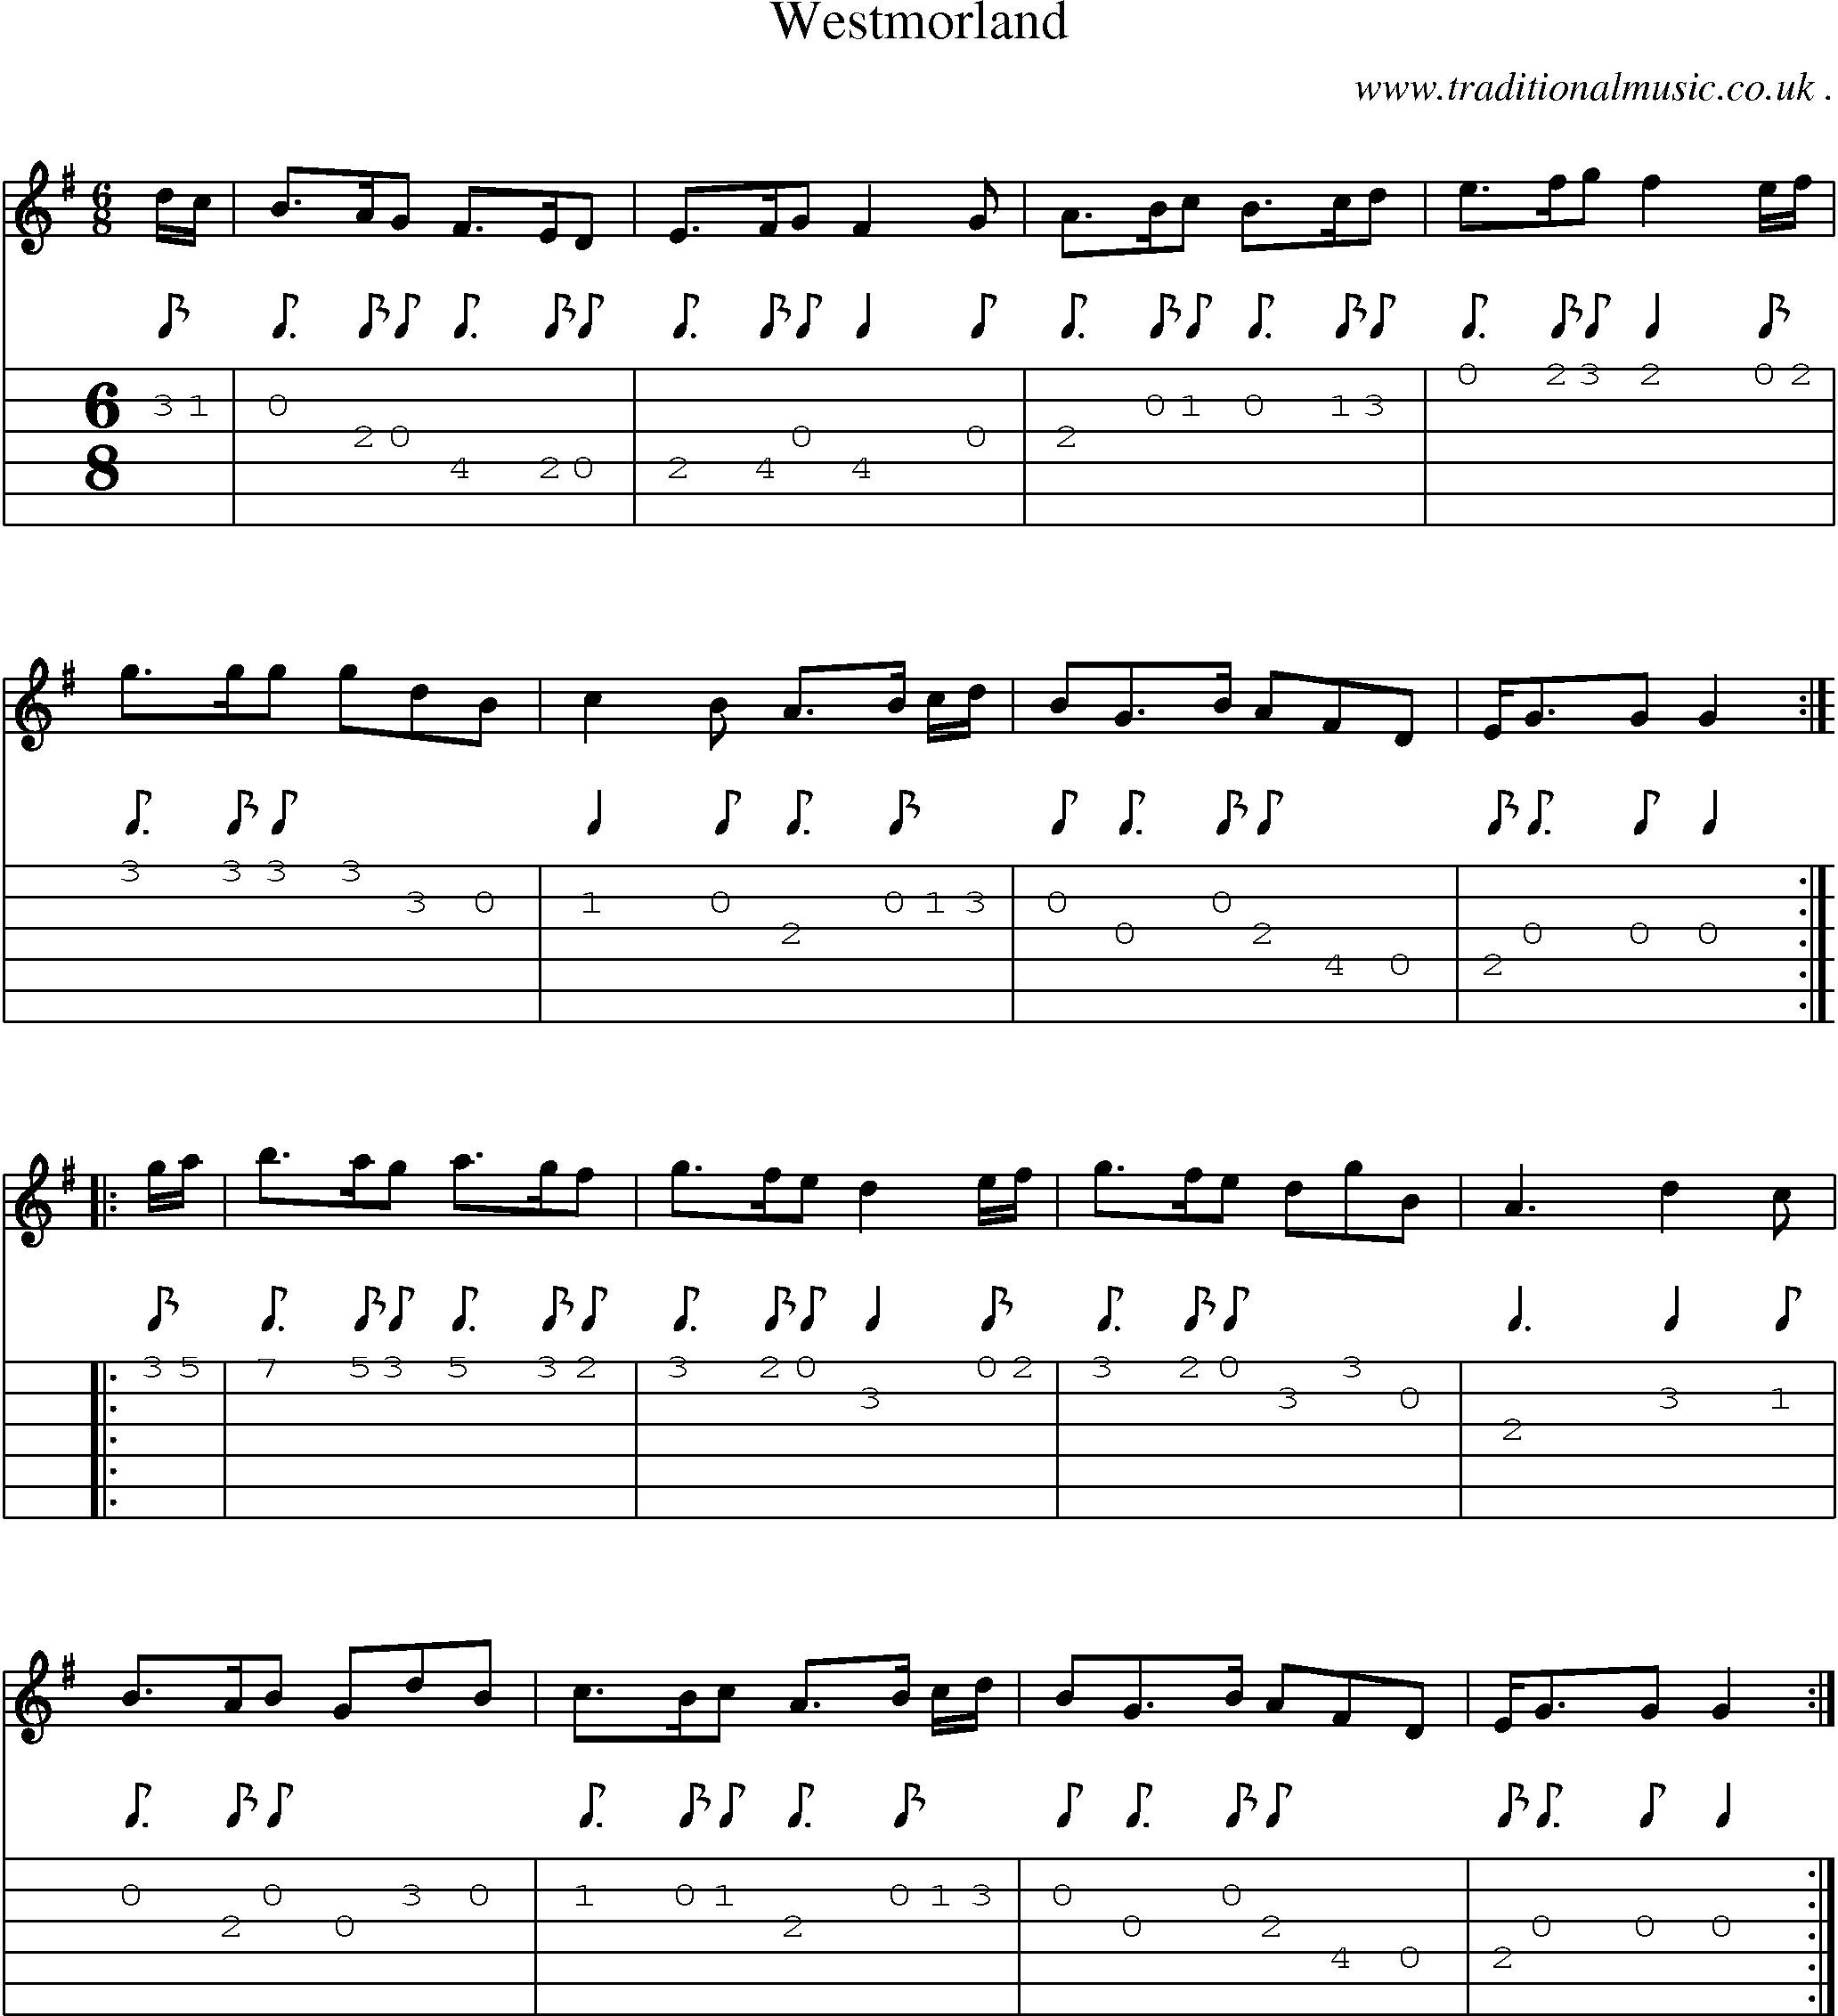 Sheet-Music and Guitar Tabs for Westmorland